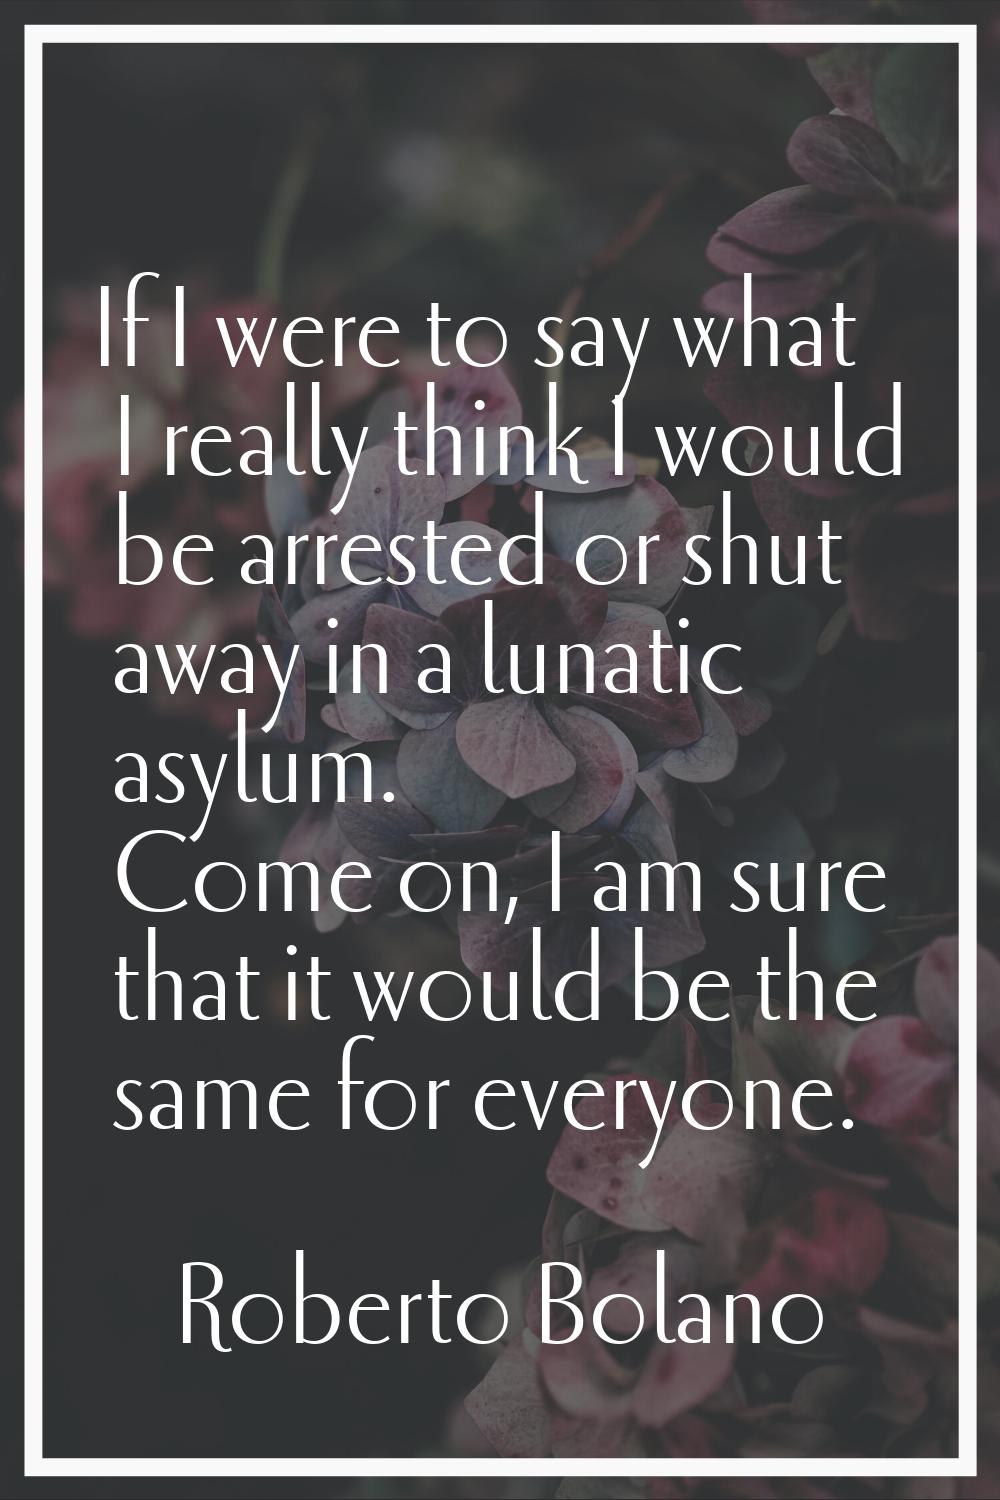 If I were to say what I really think I would be arrested or shut away in a lunatic asylum. Come on,